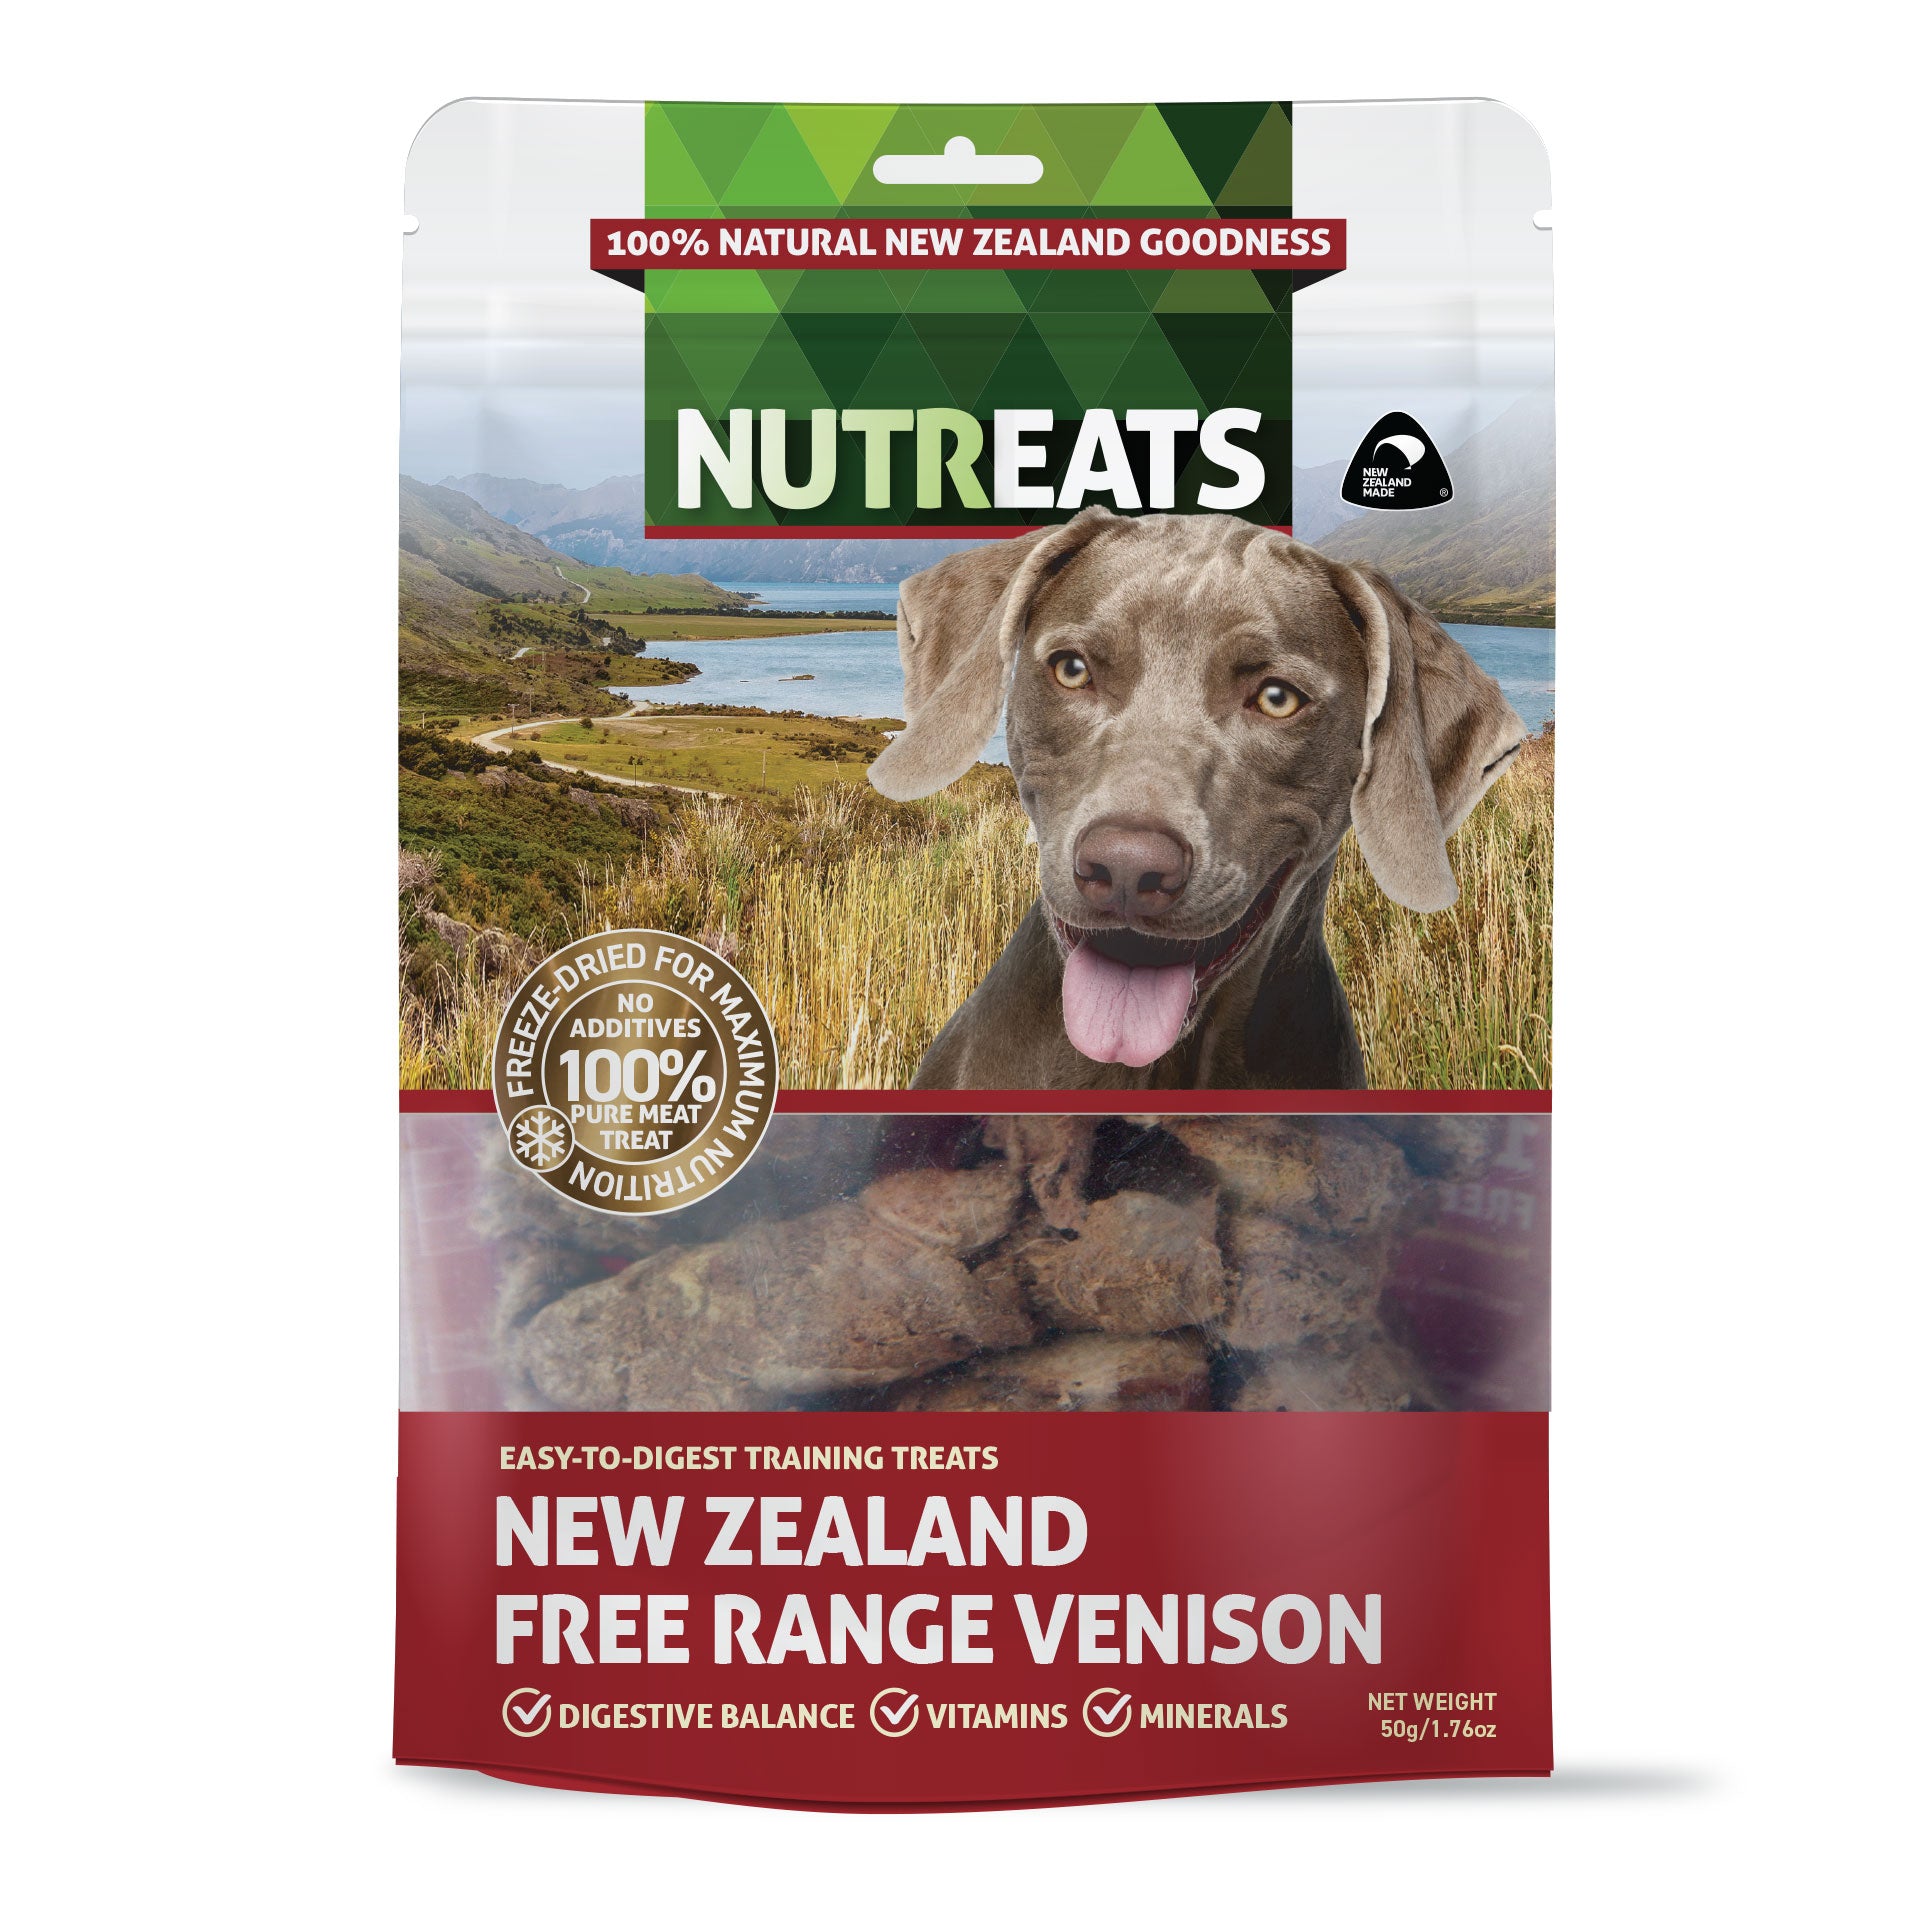 Nutreats New Zealand free range venison dog treats supporting digestive balance rich in vitamins and minerals. Easy to digest protein treat for your dog that supports their health.